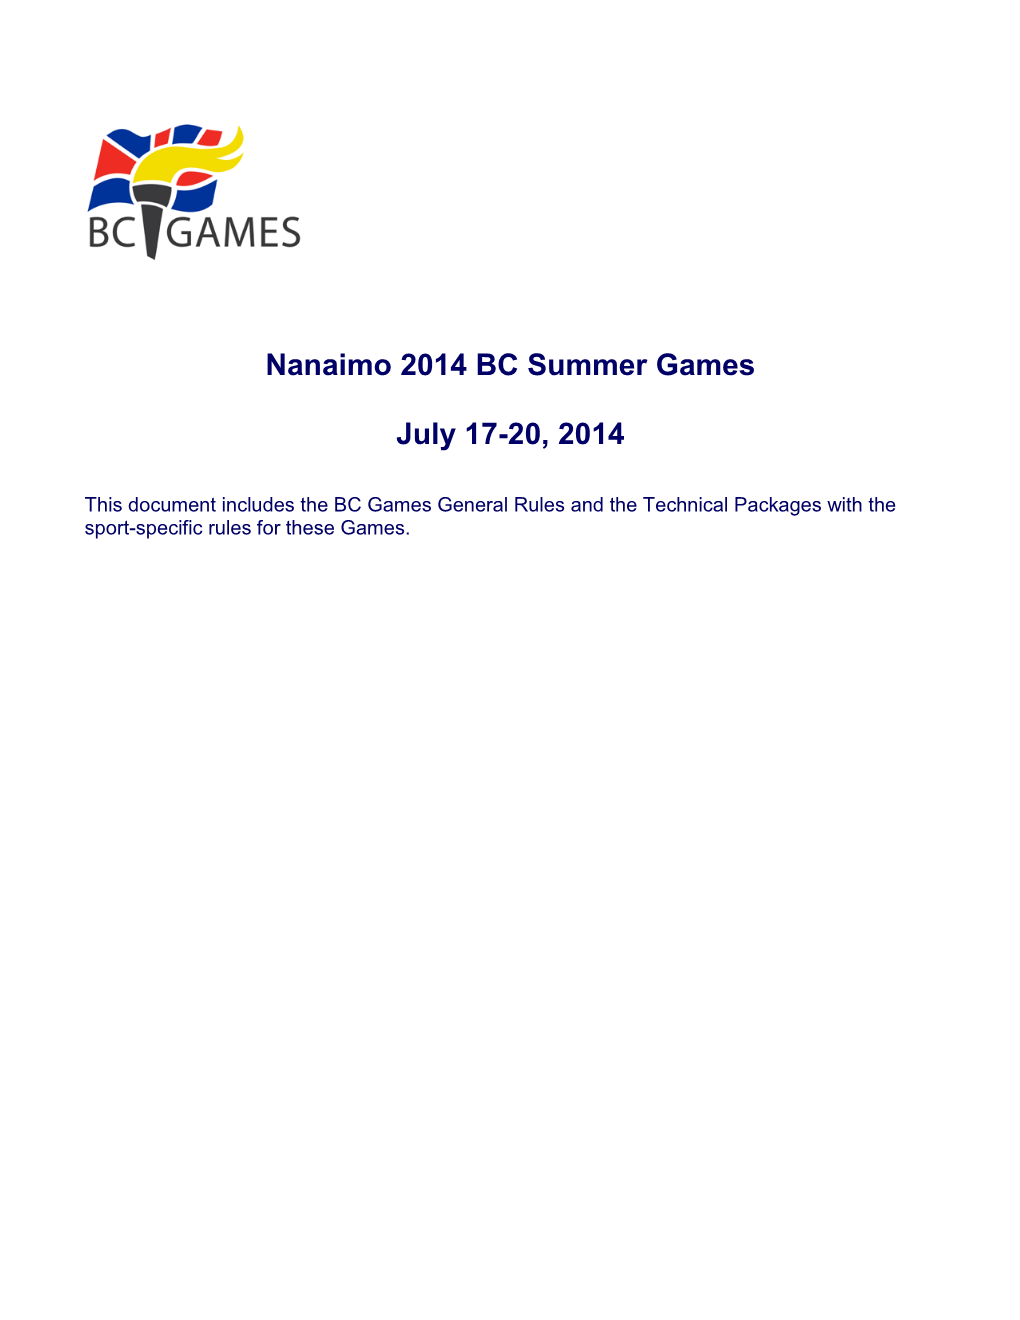 Nanaimo 2014 BC Summer Games July 17-20, 2014 Technical Packages Provide Details of the Eligibility Requirements As Well As Event and Competition Information